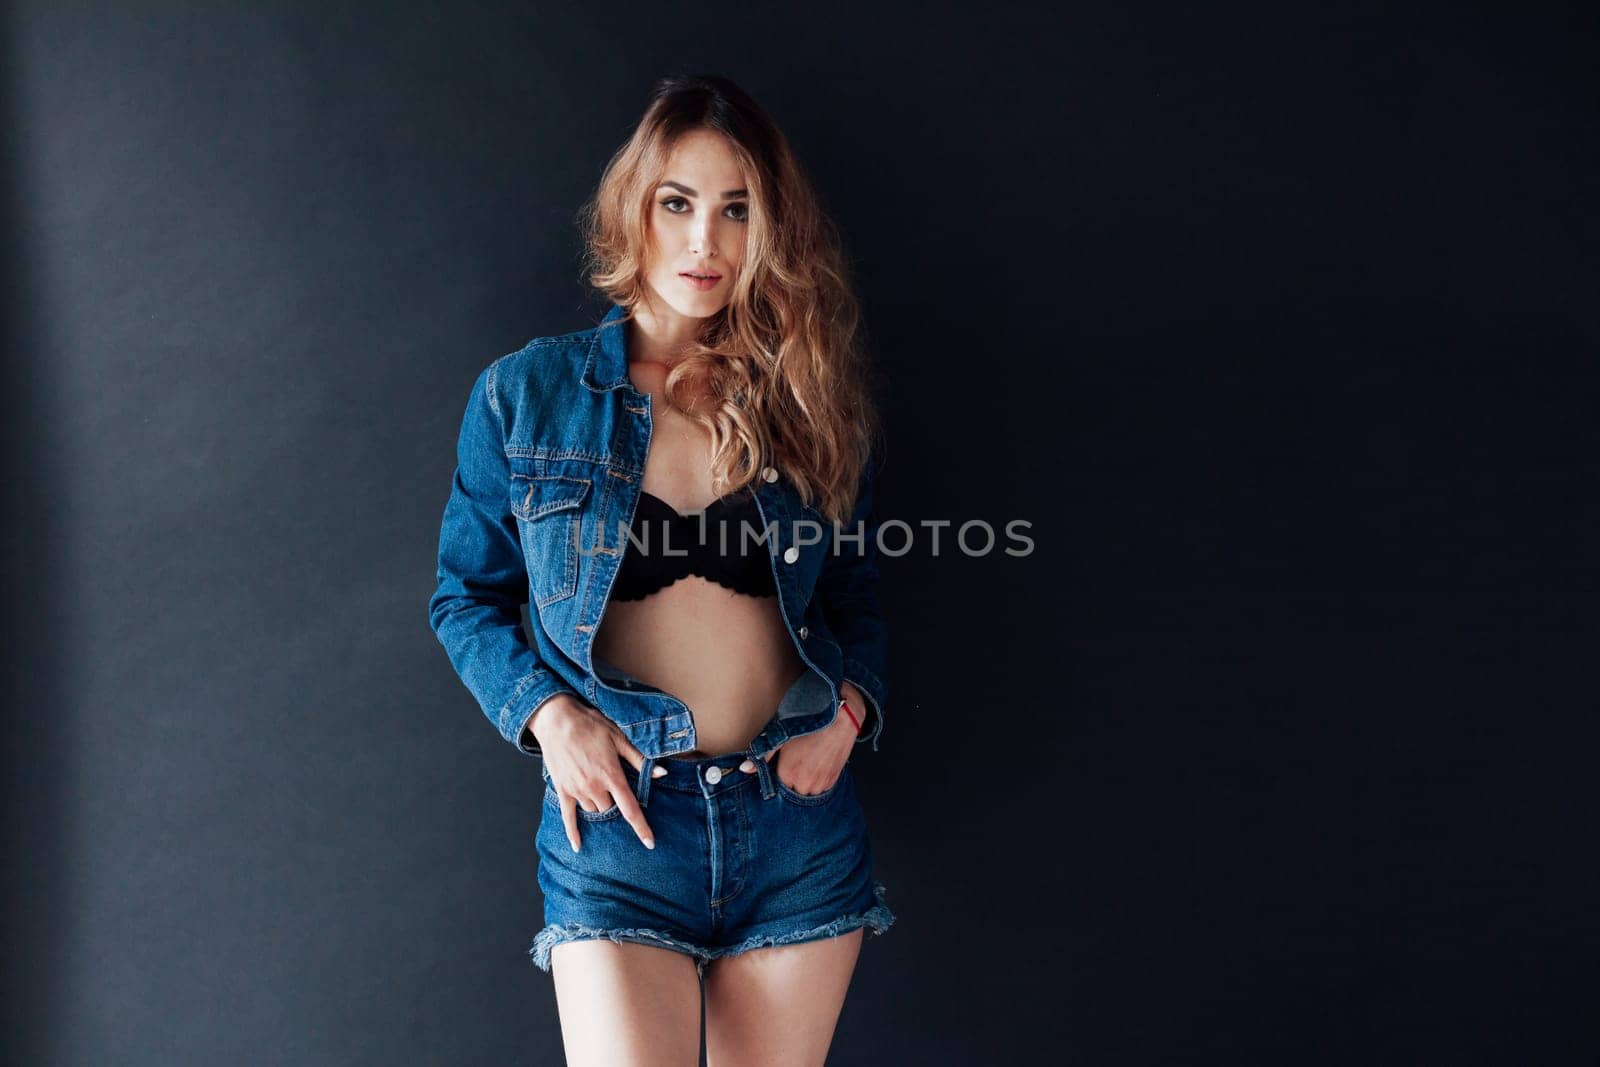 Portrait of a fashionable woman in lingerie and jeans